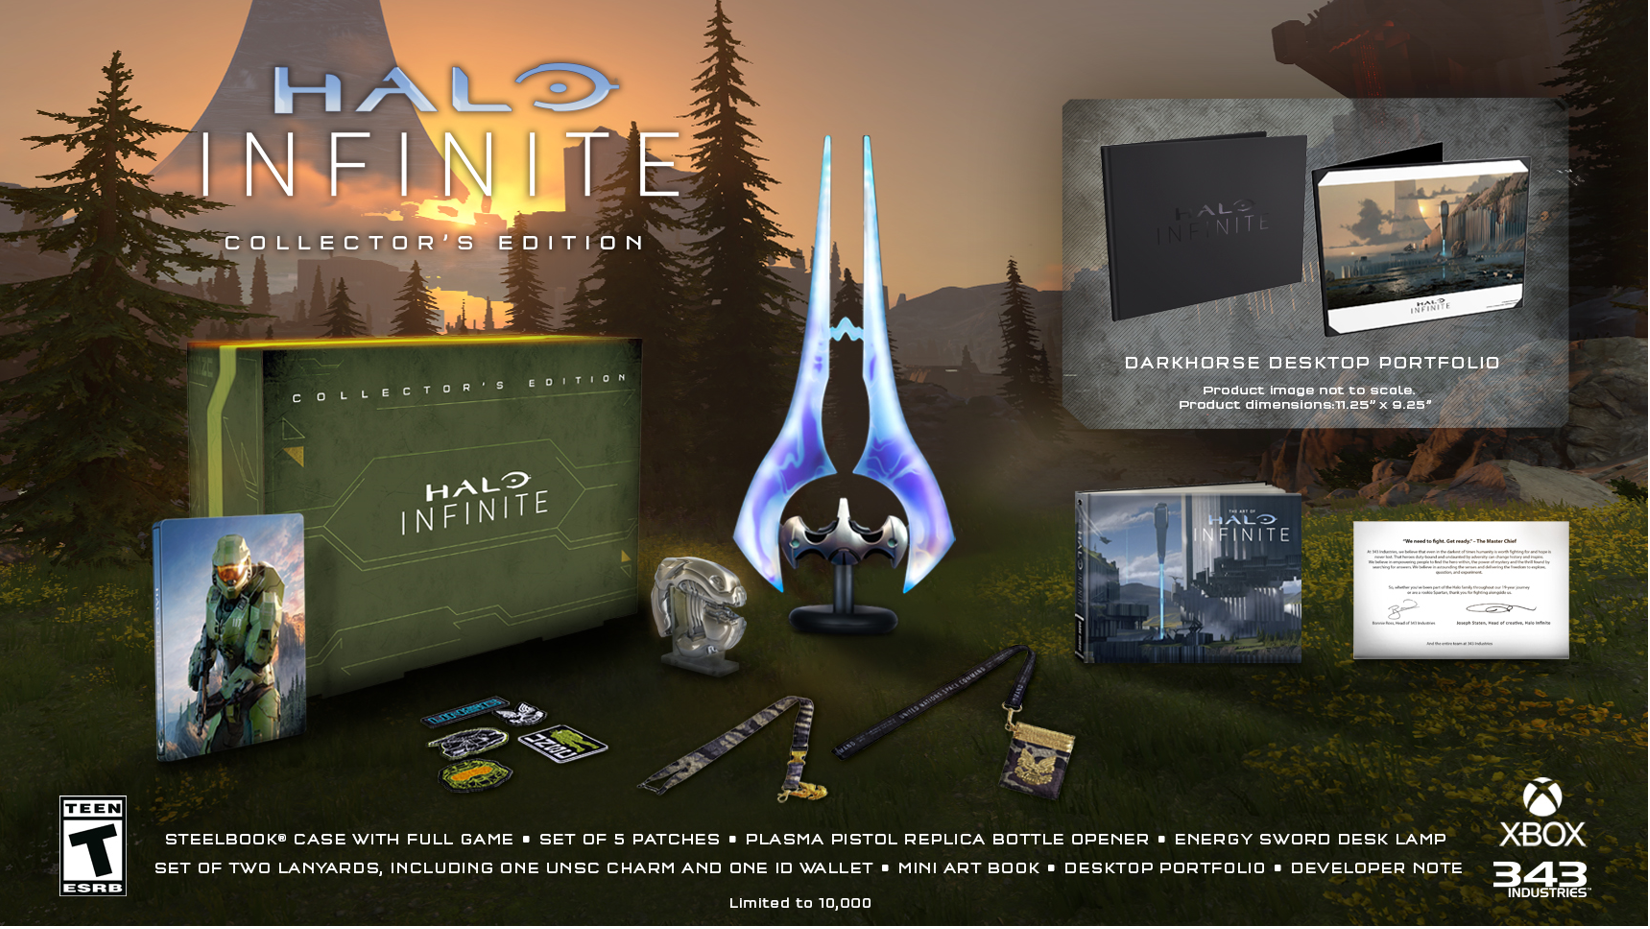 Halo Infinite Collector’s Edition, with Steelbook*Back in stock* $169